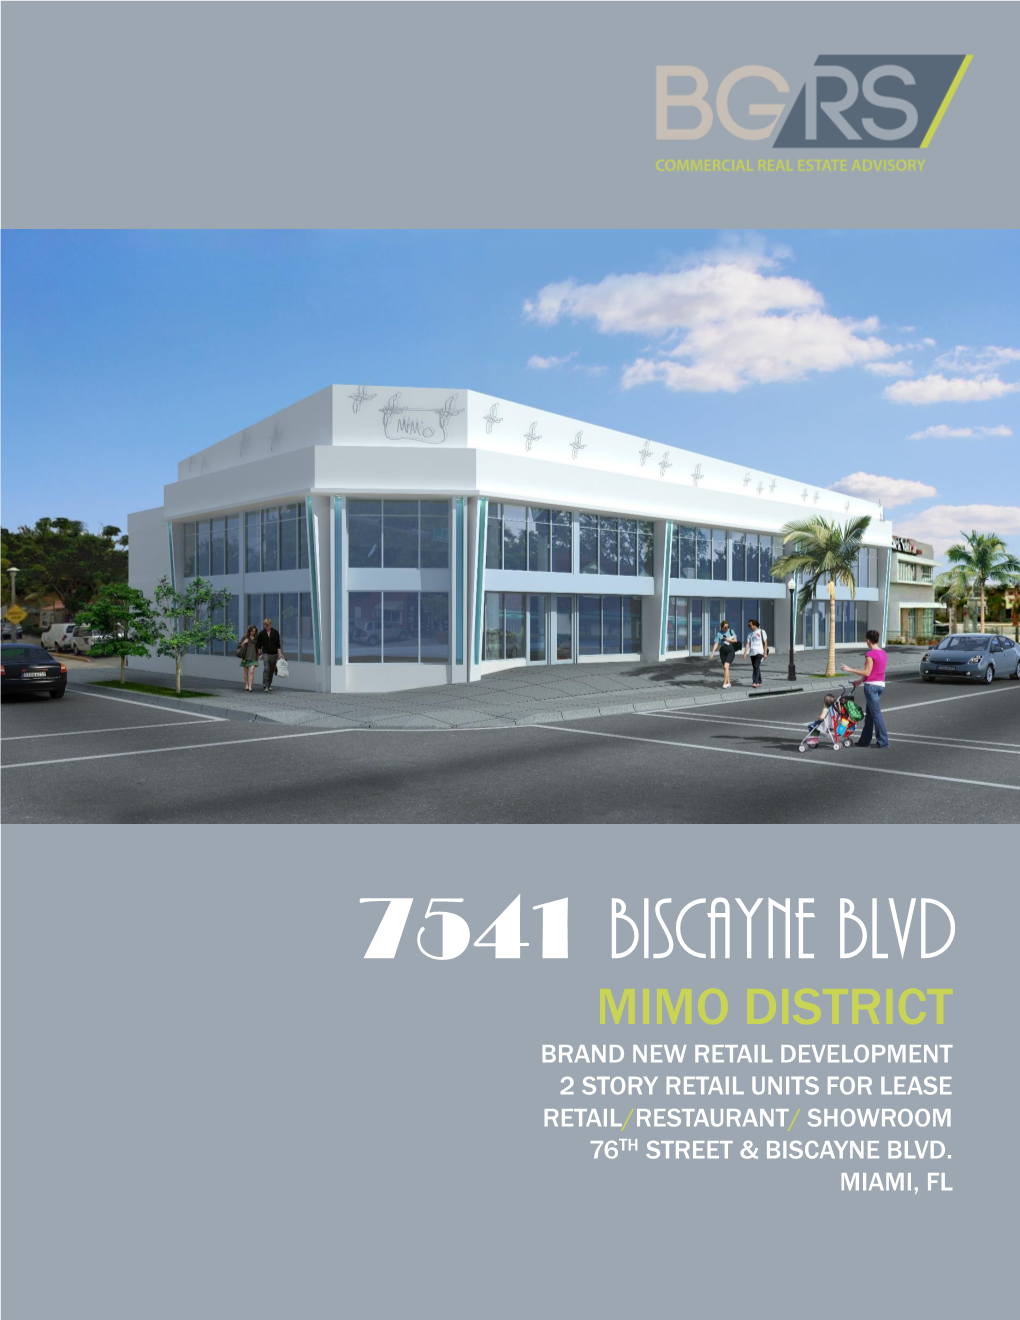 7541 Biscayne Blvd Mimo District Brand New Retail Development 2 Story Retail Units for Lease Retail/Restaurant/ Showroom 76Th Street & Biscayne Blvd